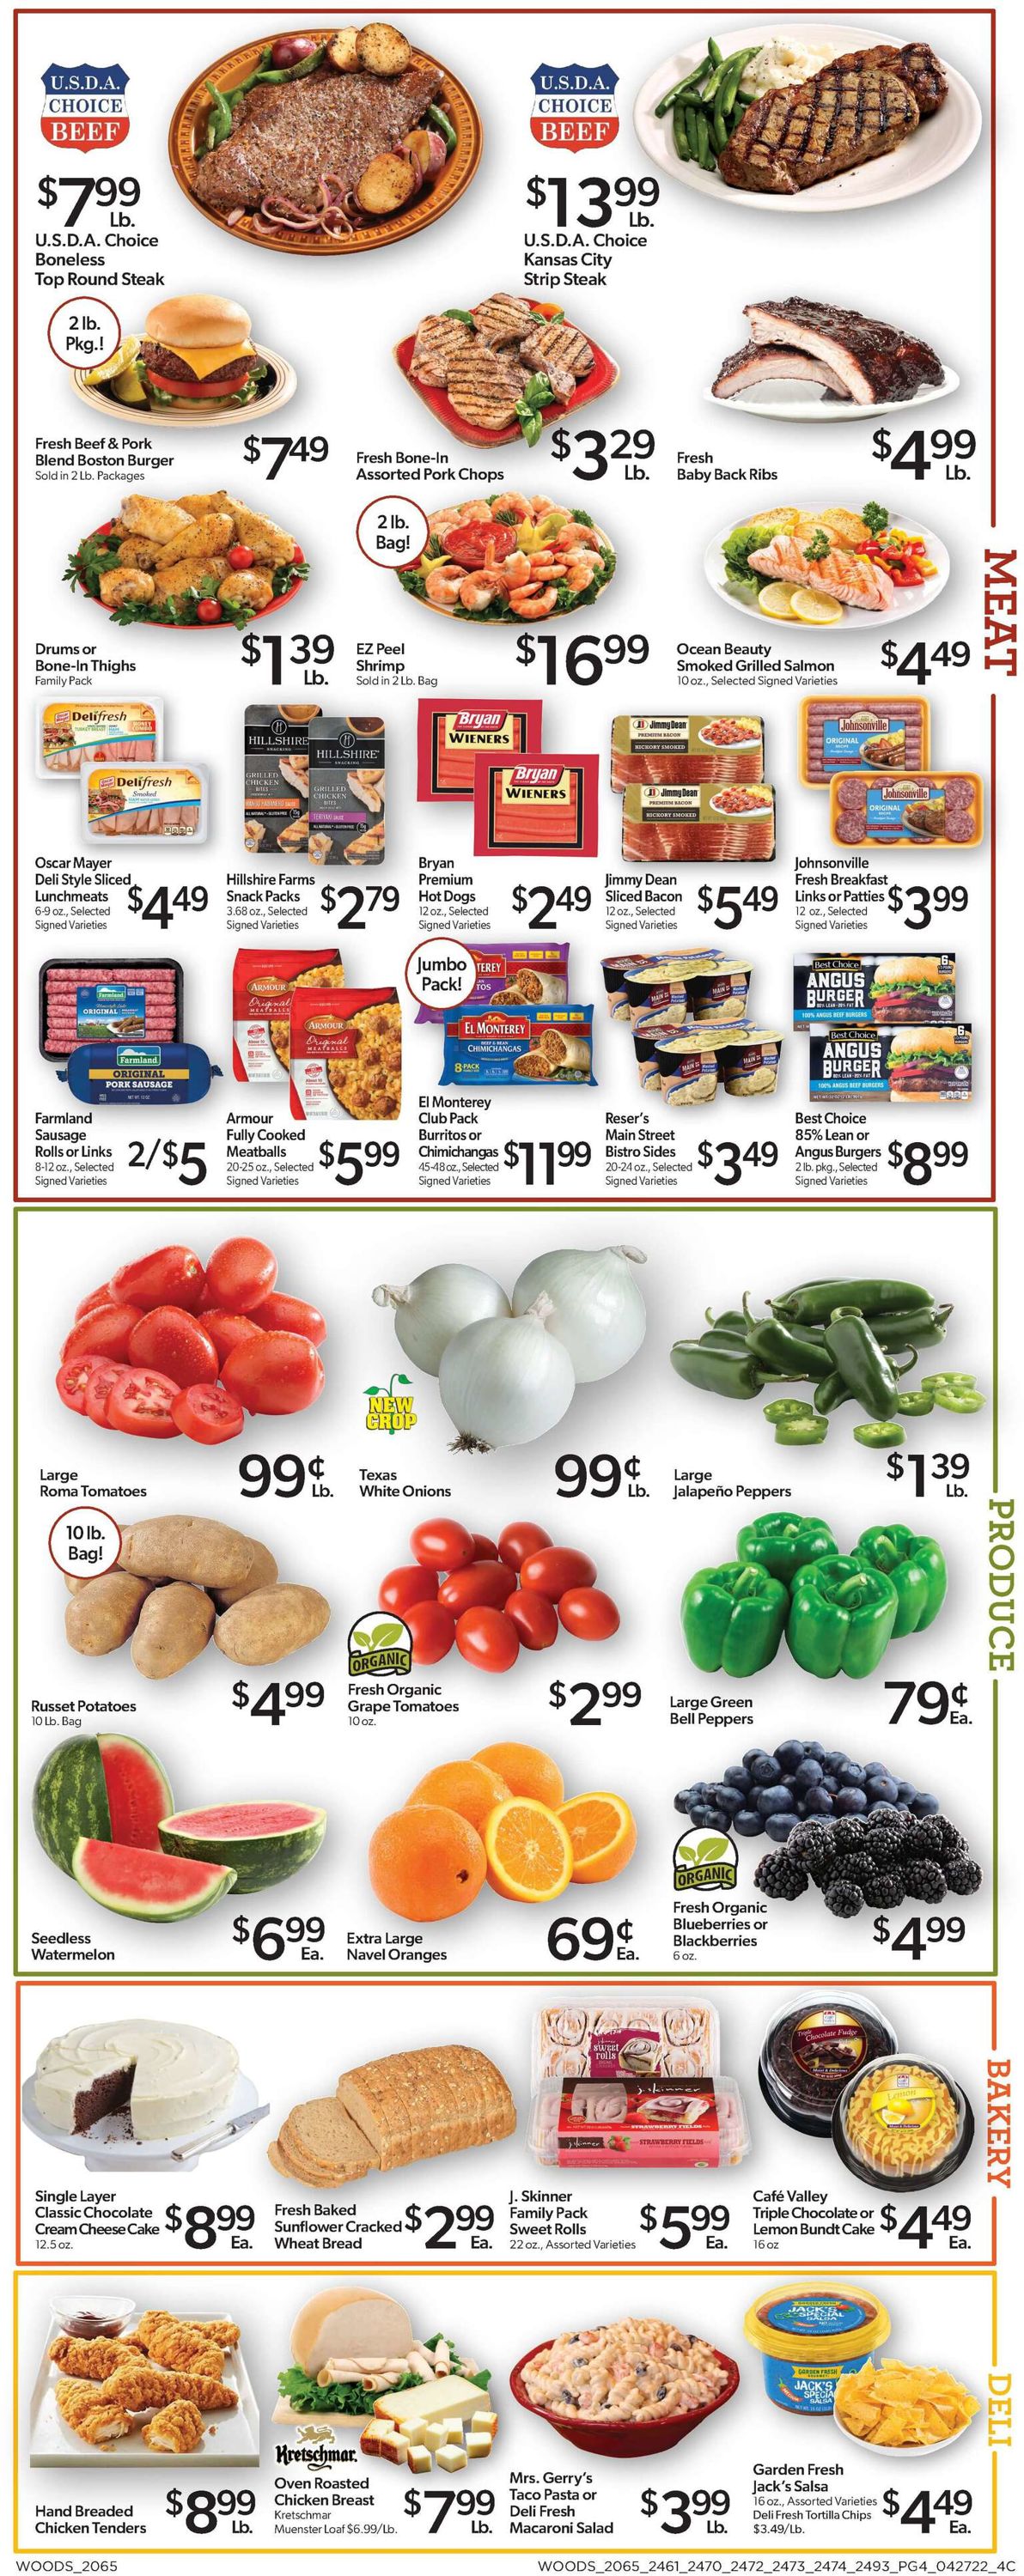 Woods Supermarket Ad from 04/27/2022